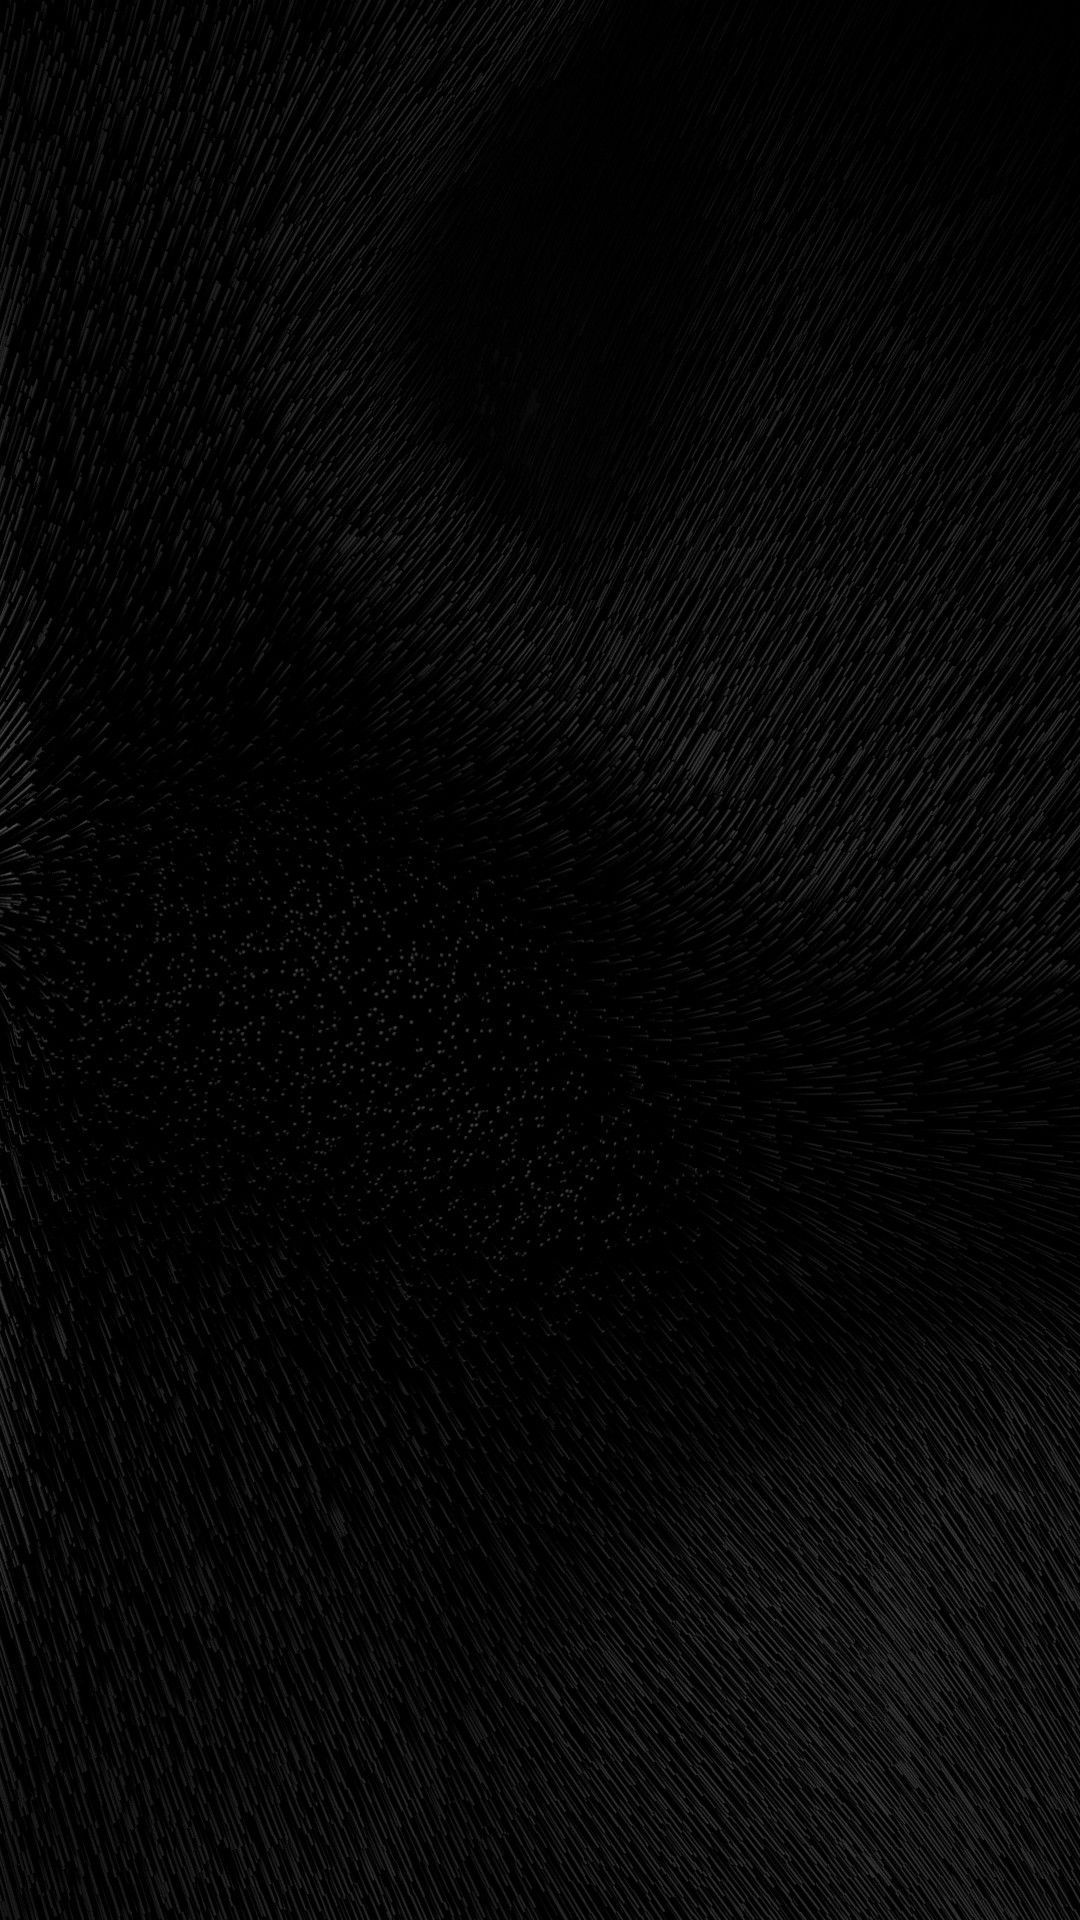 61 Pitch Black ideas  shades of black black aesthetic textures patterns